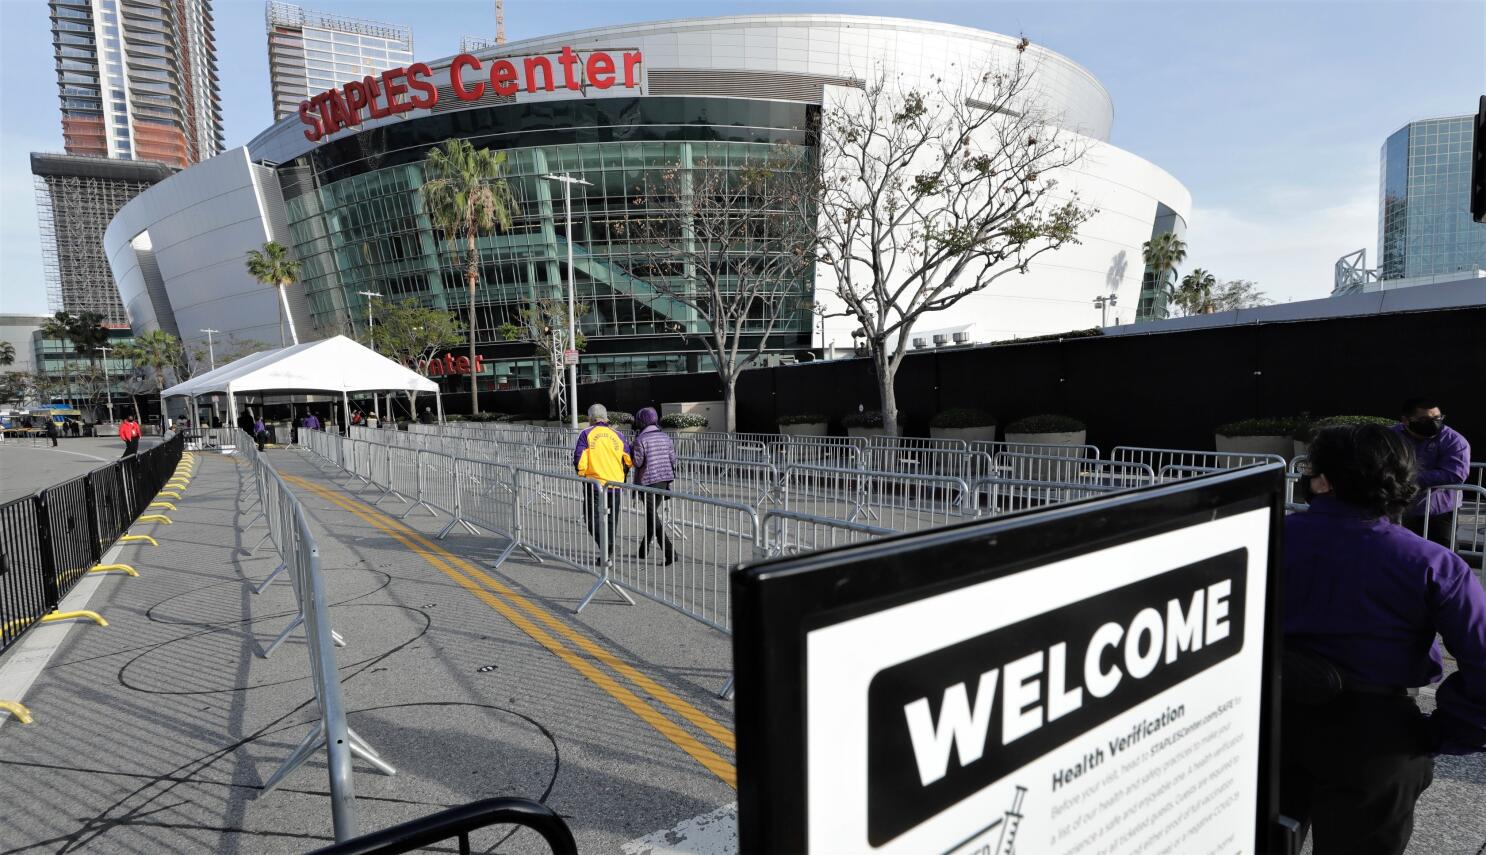 L.A. Lakers Extend Staples Center Lease Through 2041 – SportsTravel